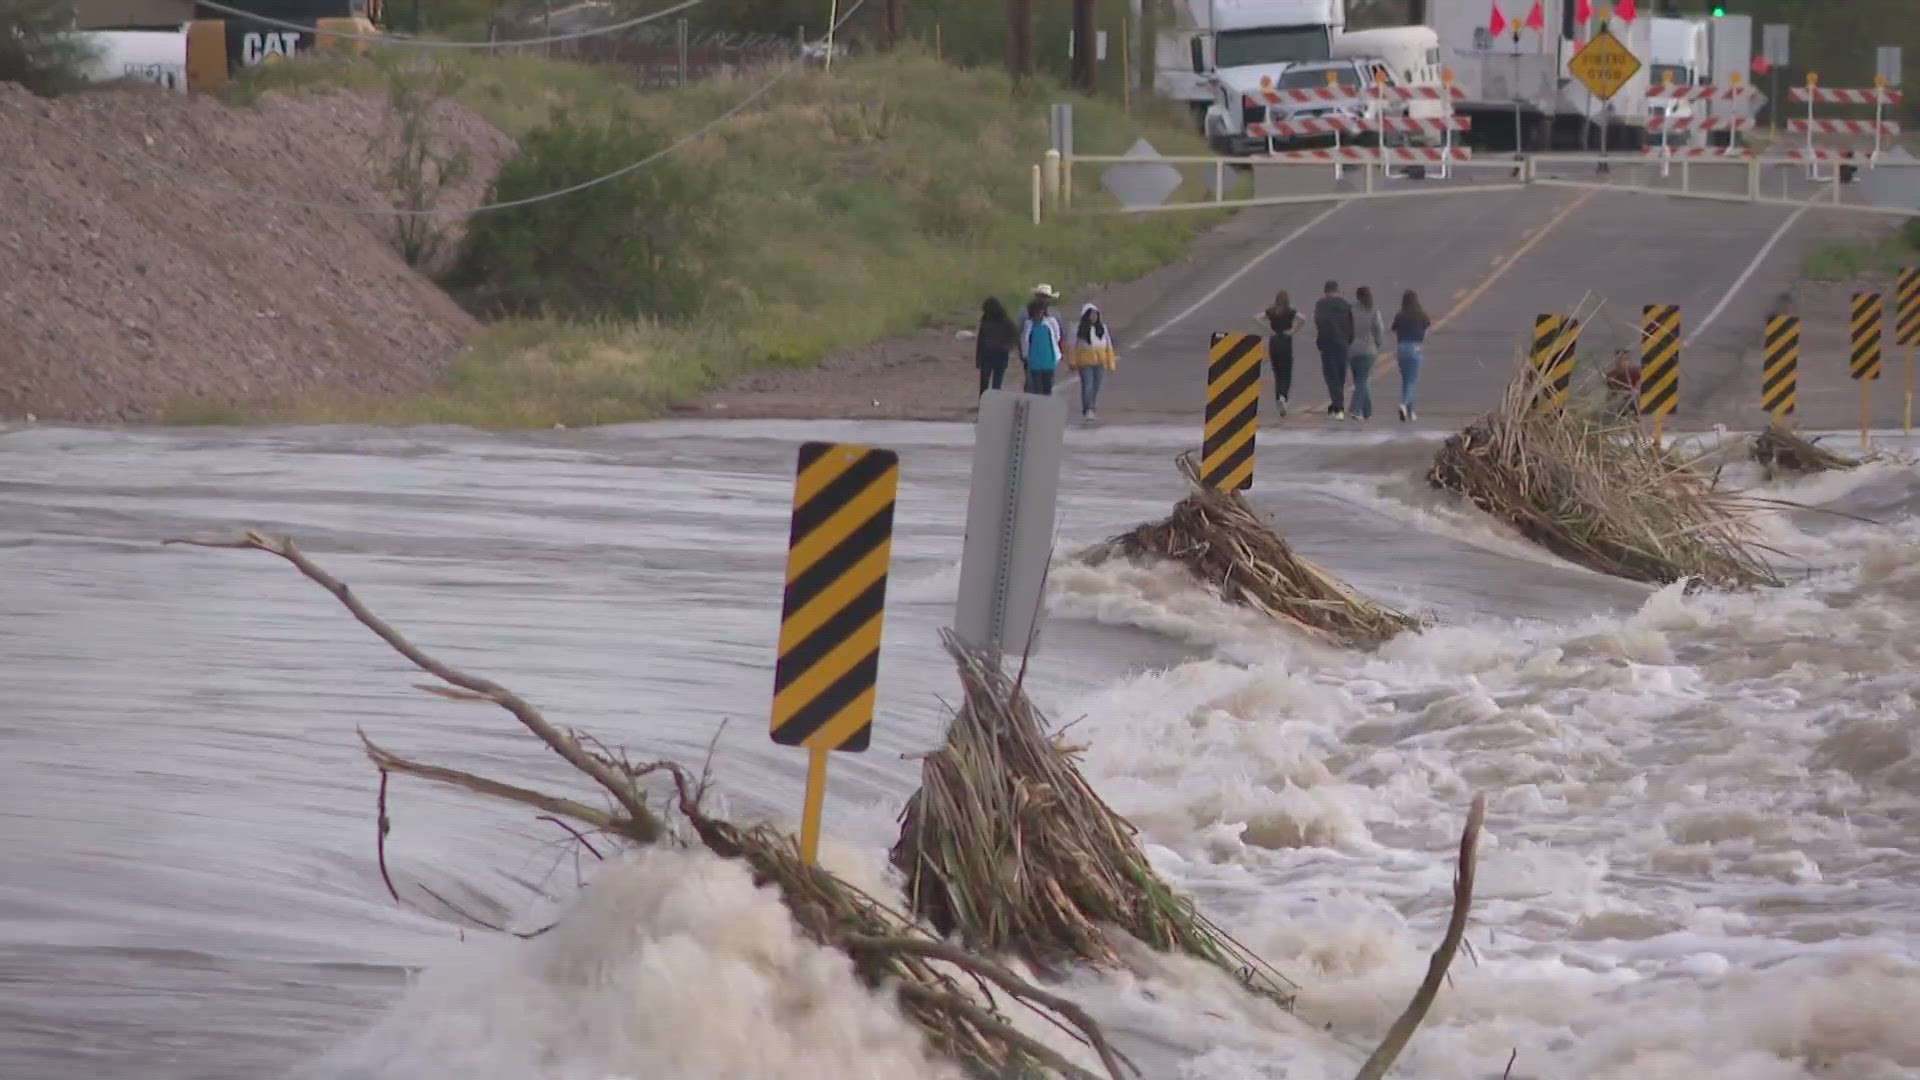 Flooding has led to an increase in water rescues in the Valley